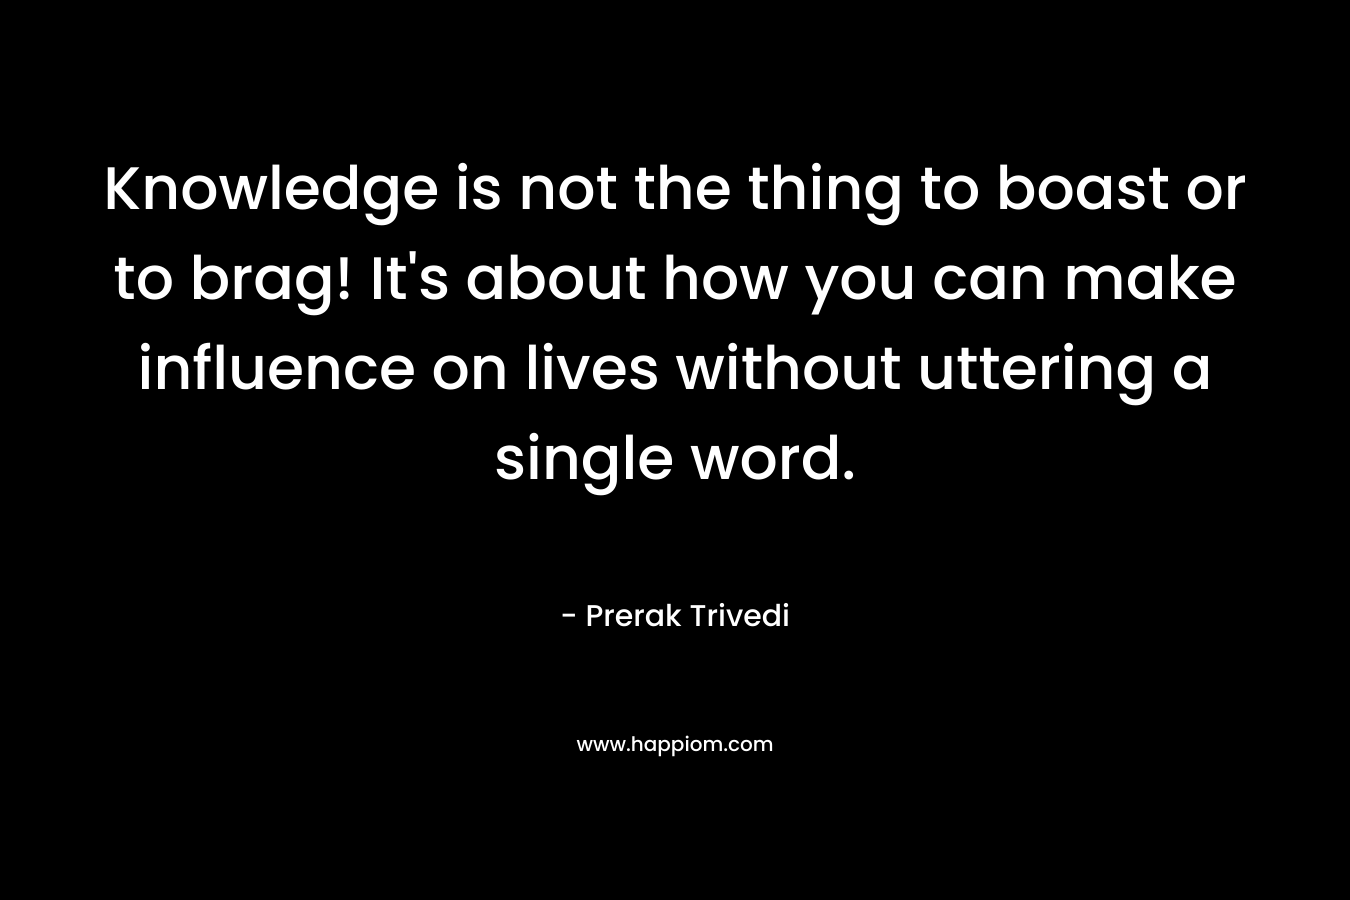 Knowledge is not the thing to boast or to brag! It's about how you can make influence on lives without uttering a single word.